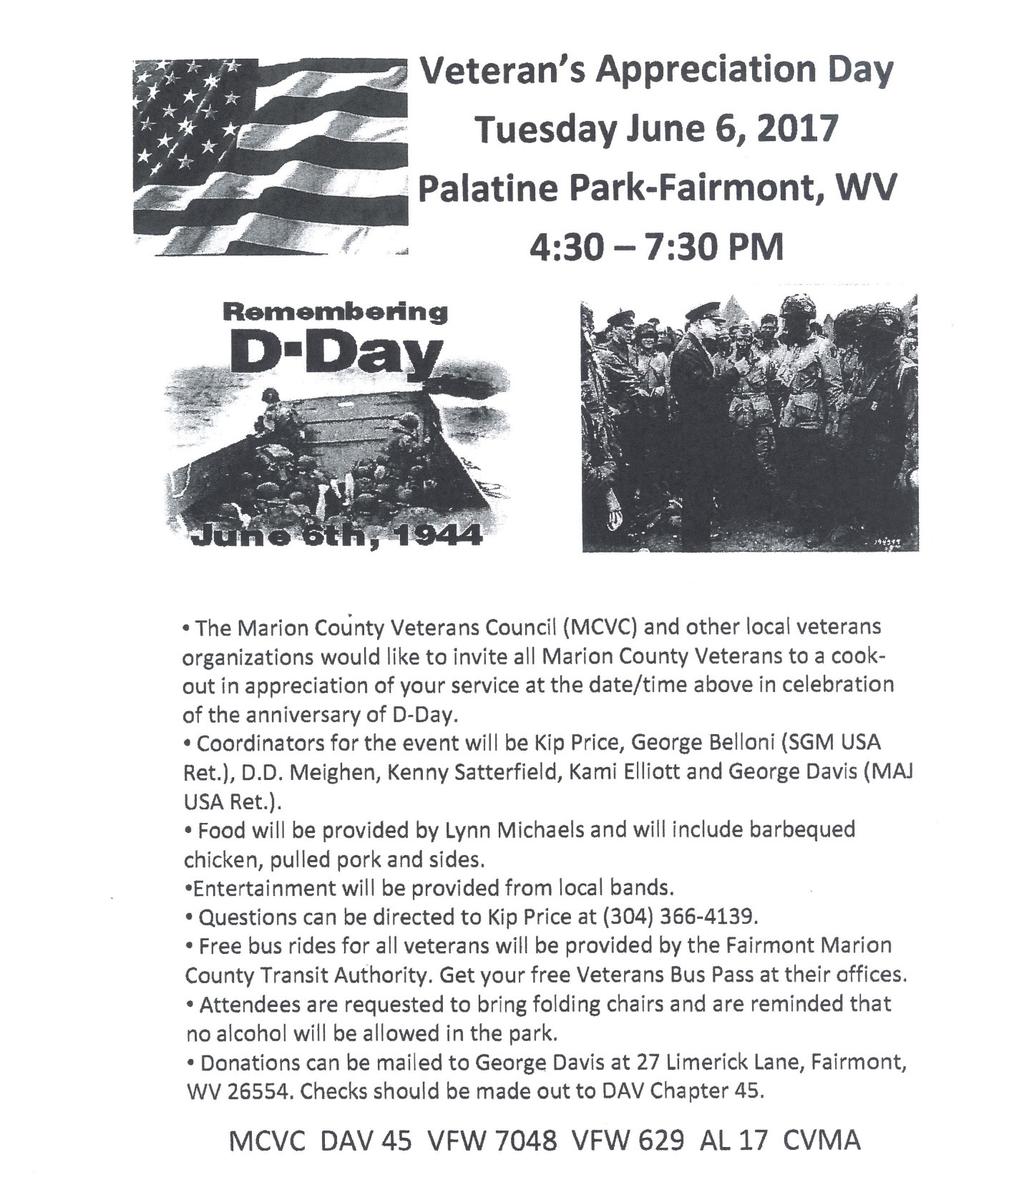 The Commission received a request for funding for the Veteran s Appreciation Day Tuesday, June 6, 2017 at Palatine Park. Commissioner Elliott moved that the Commission appropriate $1,000.